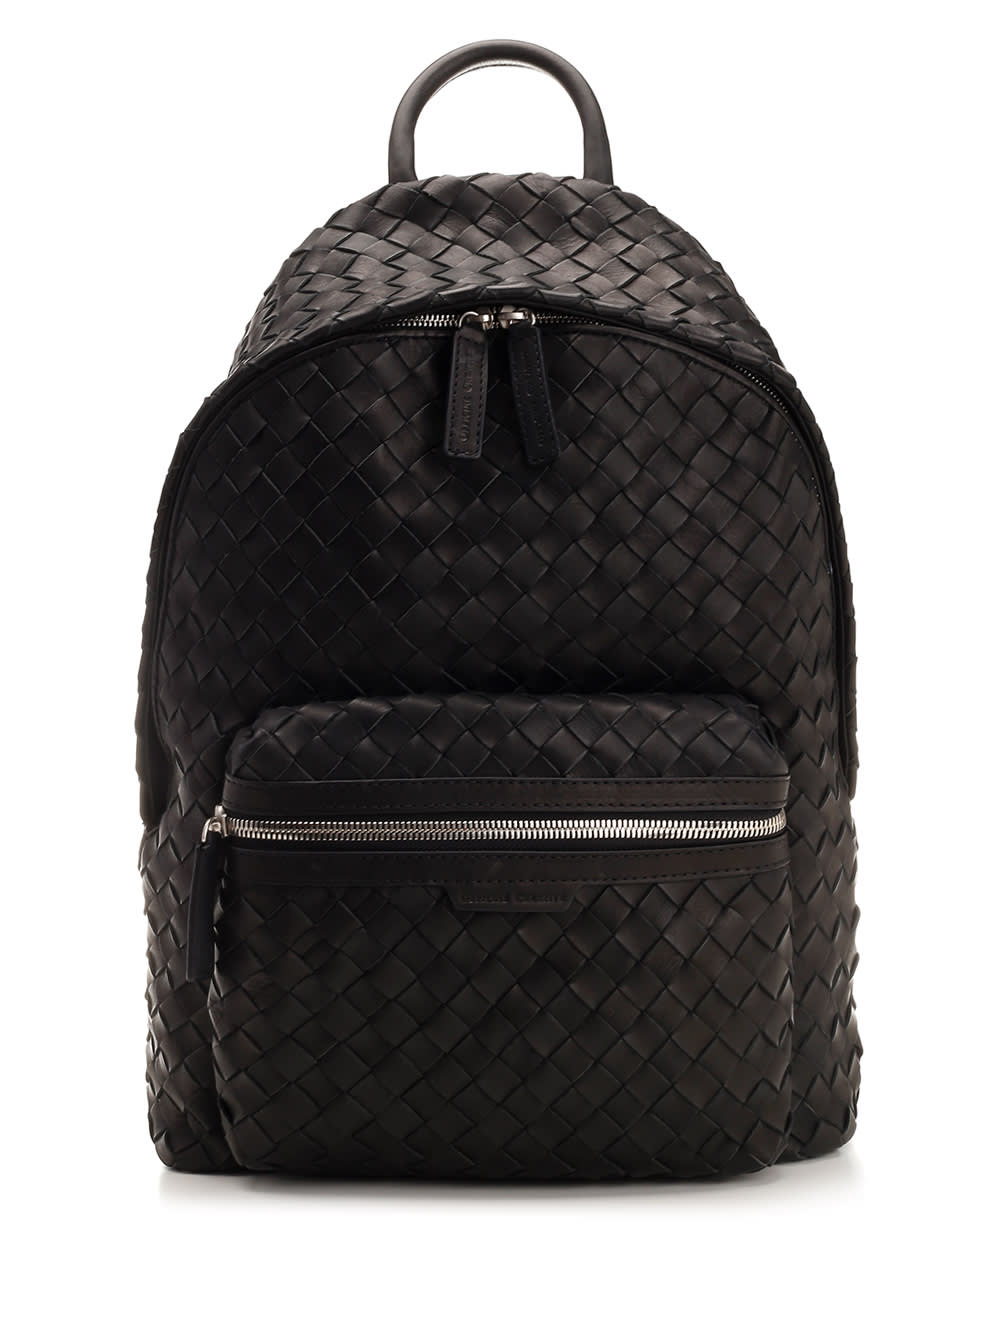 OFFICINE CREATIVE LEATHER BACKPACK